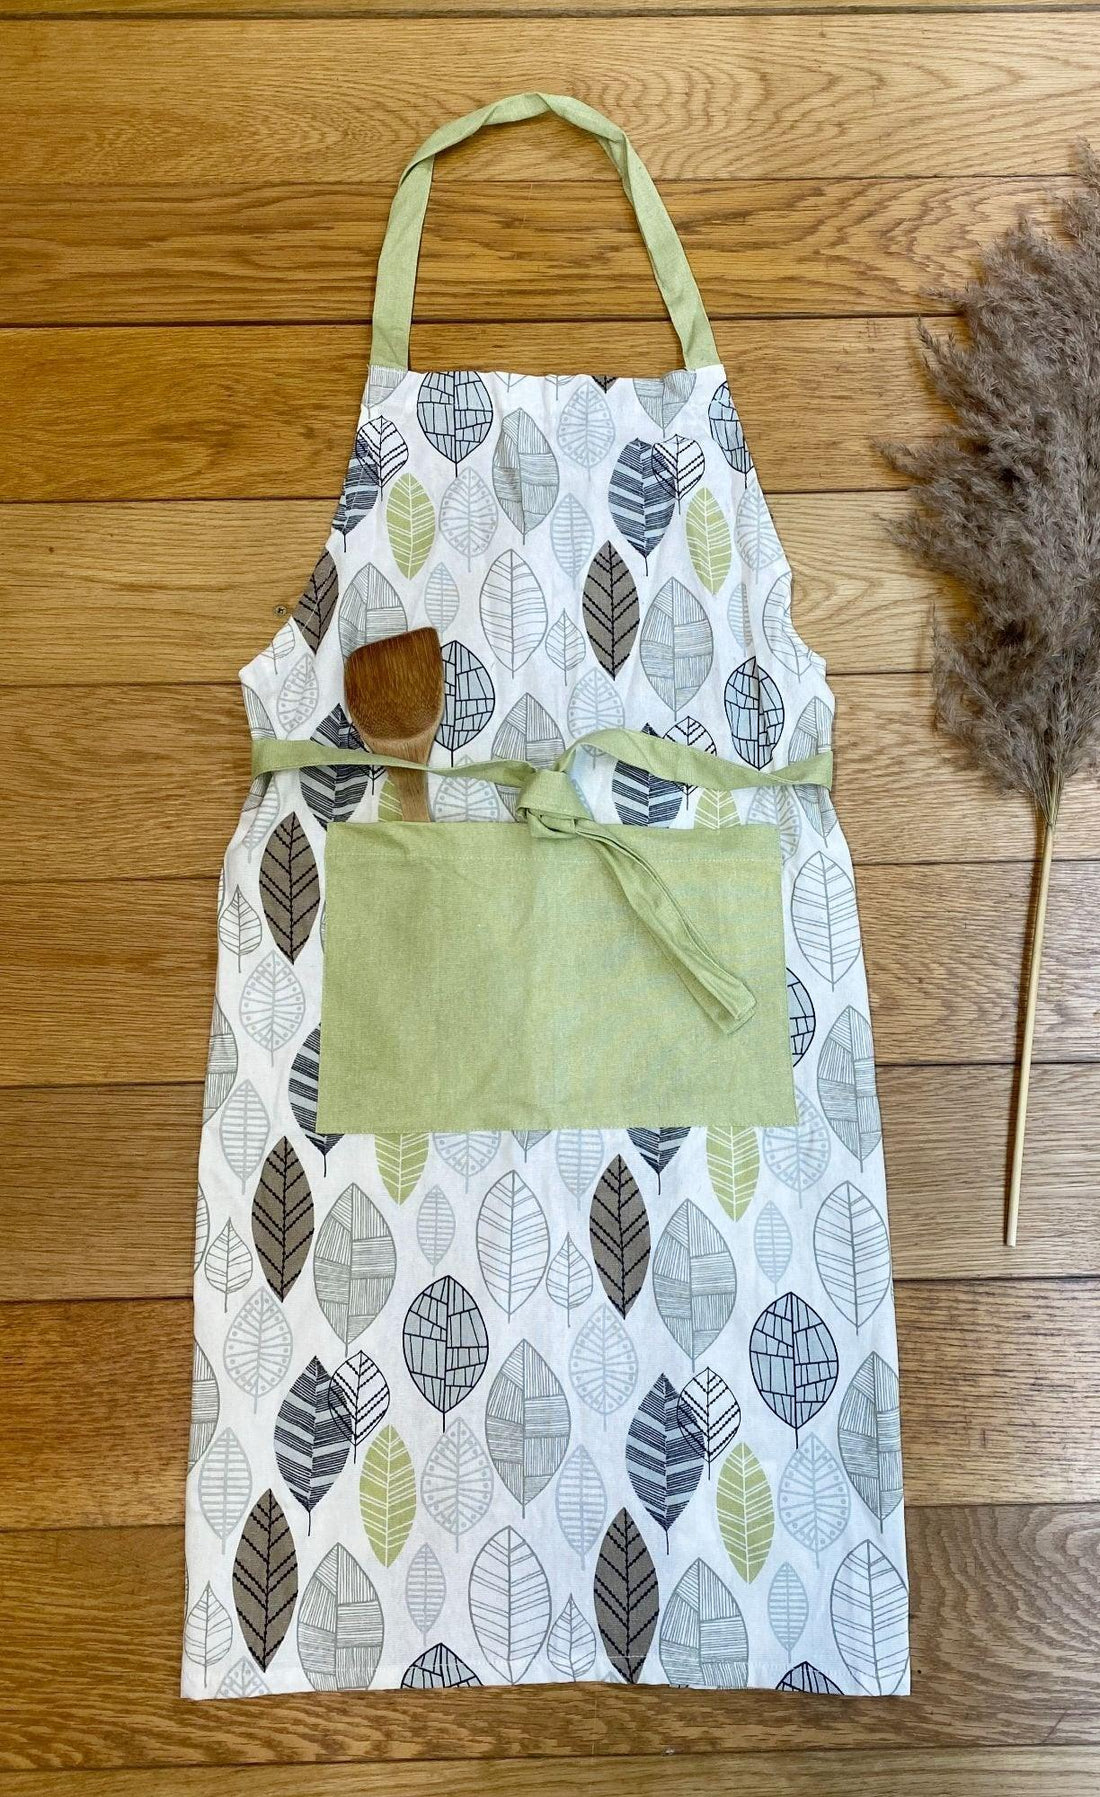 Kitchen Apron With Contemporary Green Leaf Print Design - £18.99 - Decorative Kitchen Items 